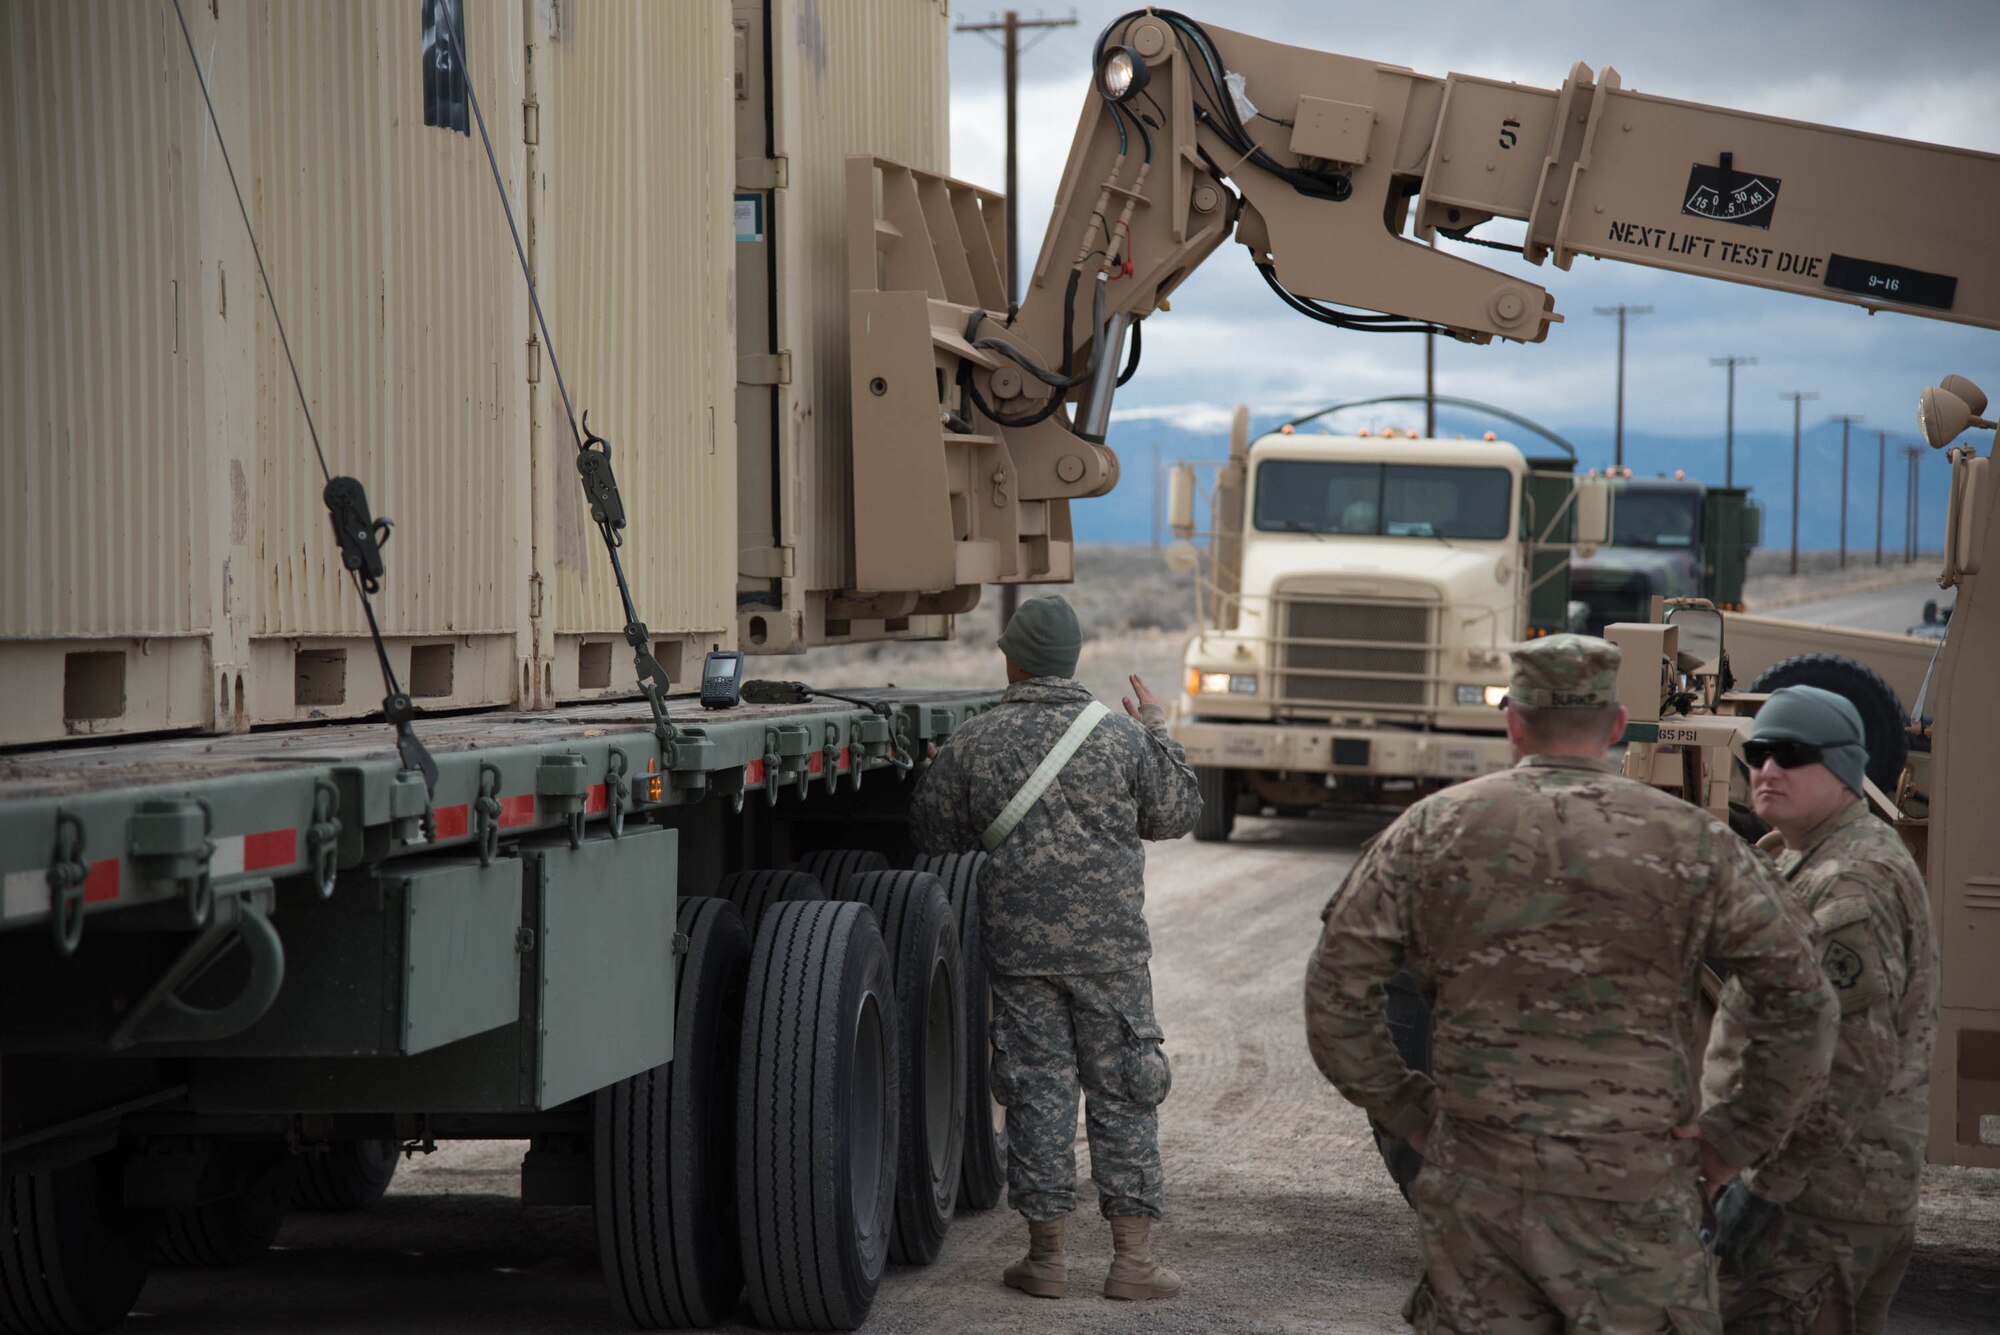 Soldiers from the U.S. Army’s 688th Rapid Port Opening Element secure equipment for transport from the forward node at Amedee Army Airfield, Calif., March 9, 2016. The 688th RPOE is working in conjunction with the Kentucky Air National Guard’s 123rd Contingency Response Group and a team from the Defense Logistics Agency to operate Joint Task Force-Port Opening Sangala during a week-long exercise called Operation Lumberjack. The objective of the JTF-PO is to establish an aerial port of debarkation, provide initial distribution capability and set up warehousing capability for distribution beyond a forward node. (Kentucky Air National Guard photo by 1st Lt. James Killen)